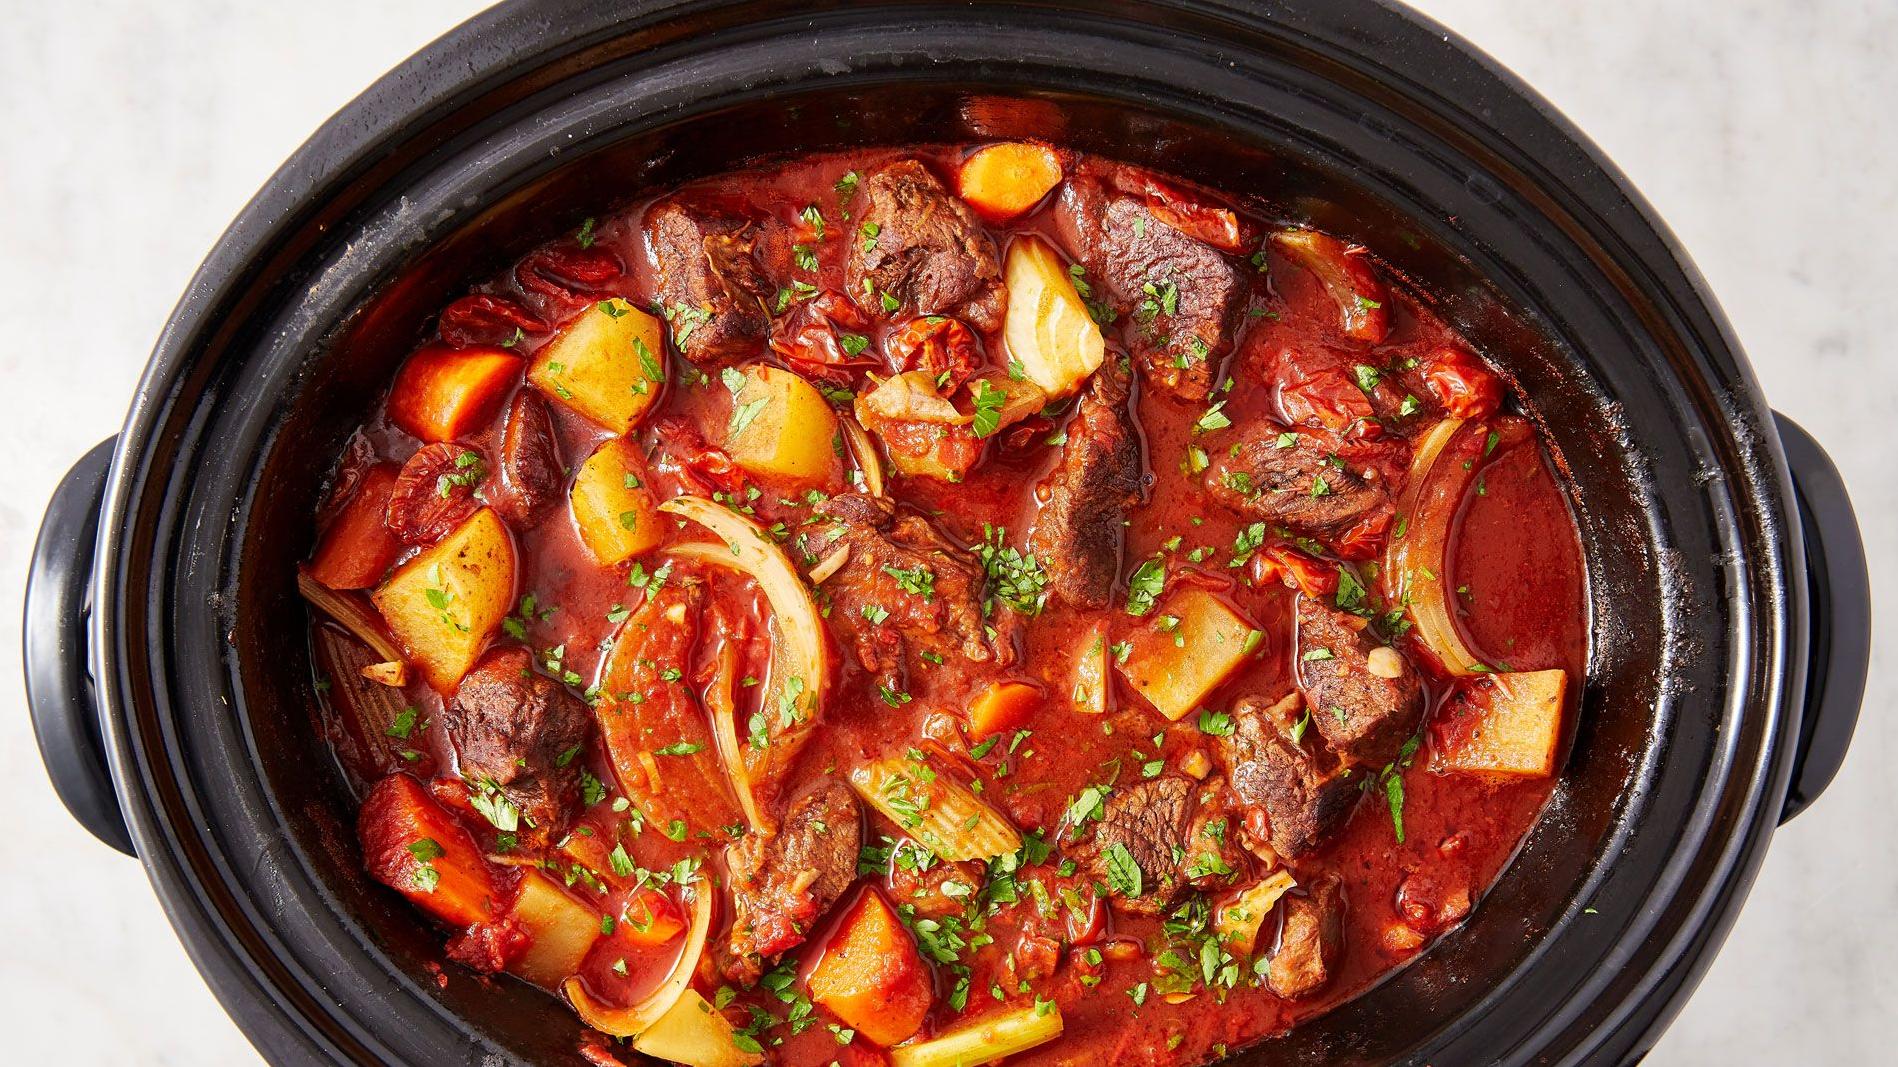  Satisfy your comfort food cravings with this Slow Cooker Red Wine Stew!